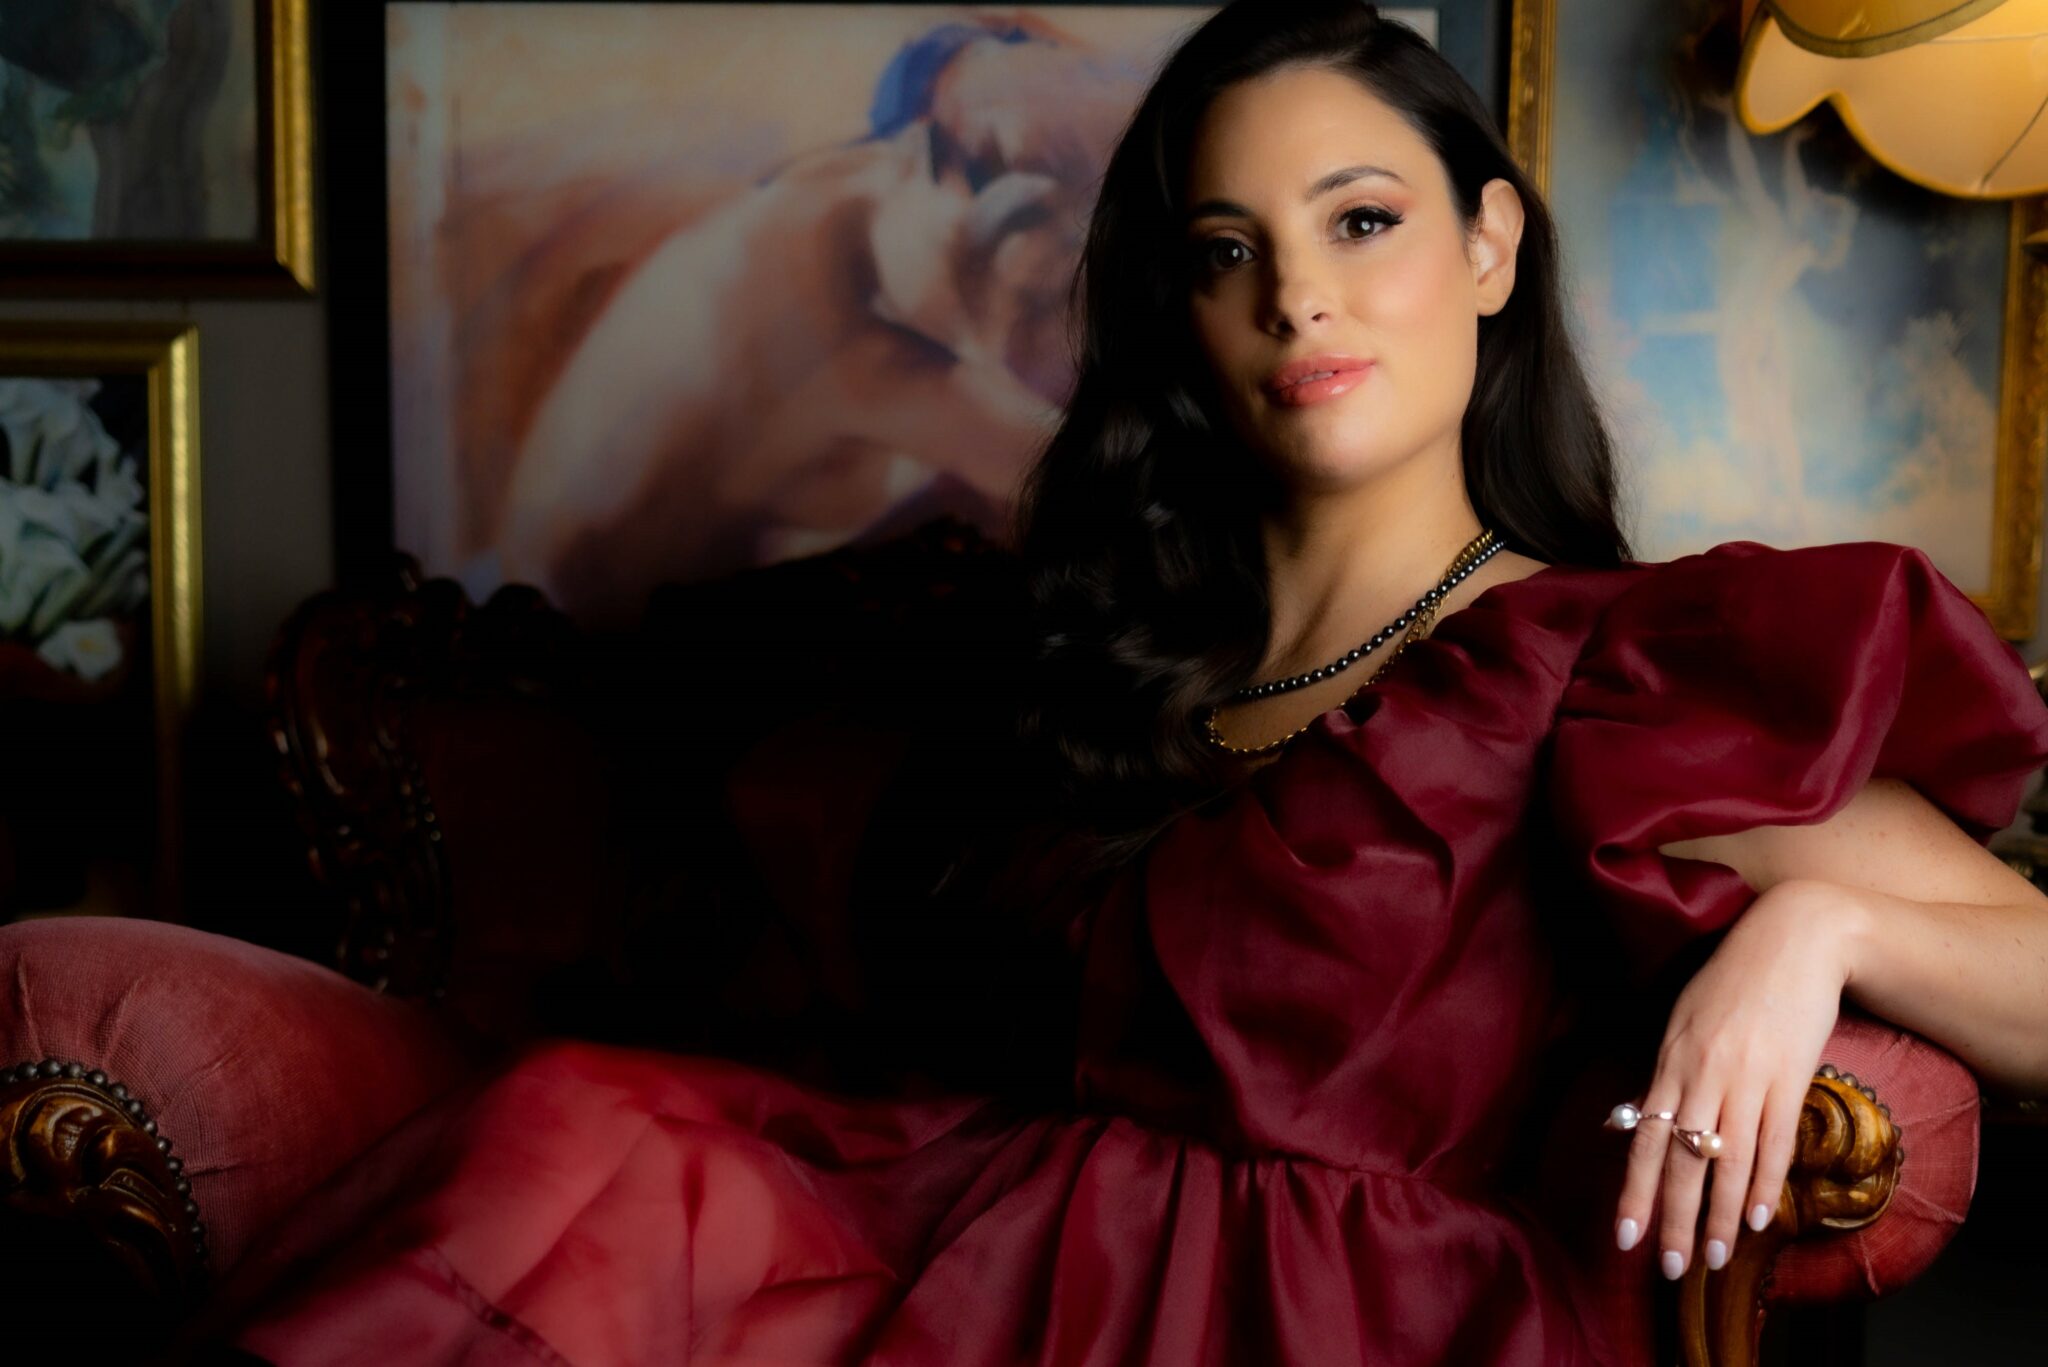 Author Jade May reclines in an old chair wearing a stunning burgundy gown.